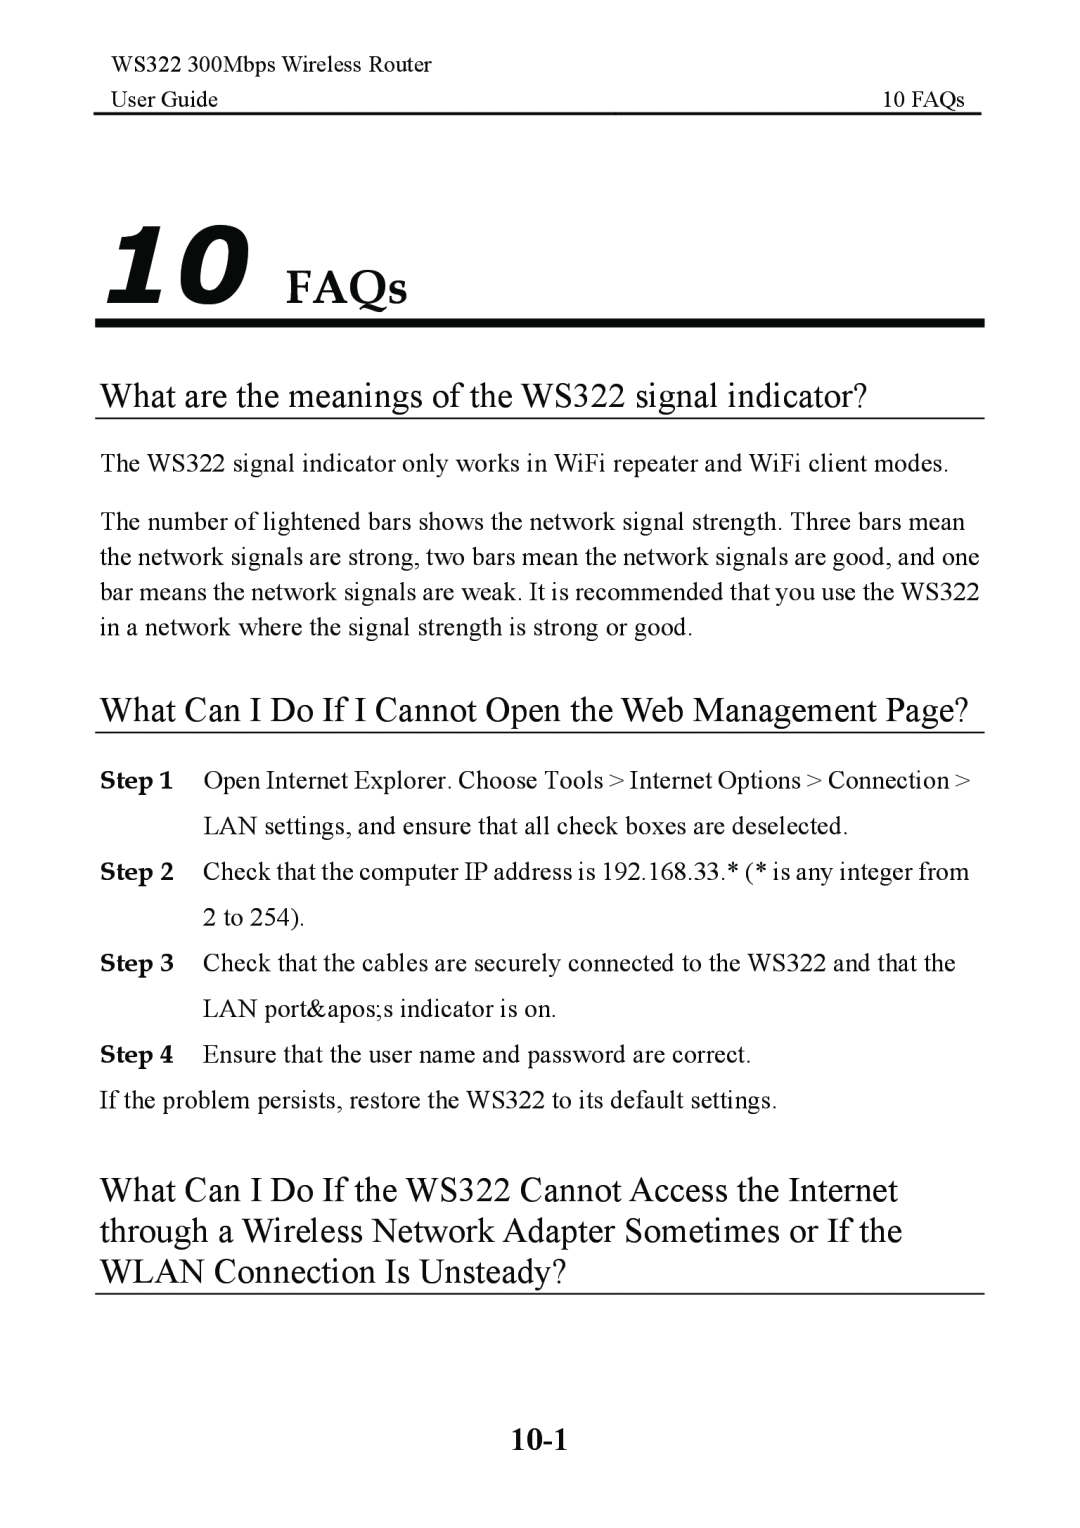 Huawei manual FAQs, What are the meanings of the WS322 signal indicator?, 10-1 